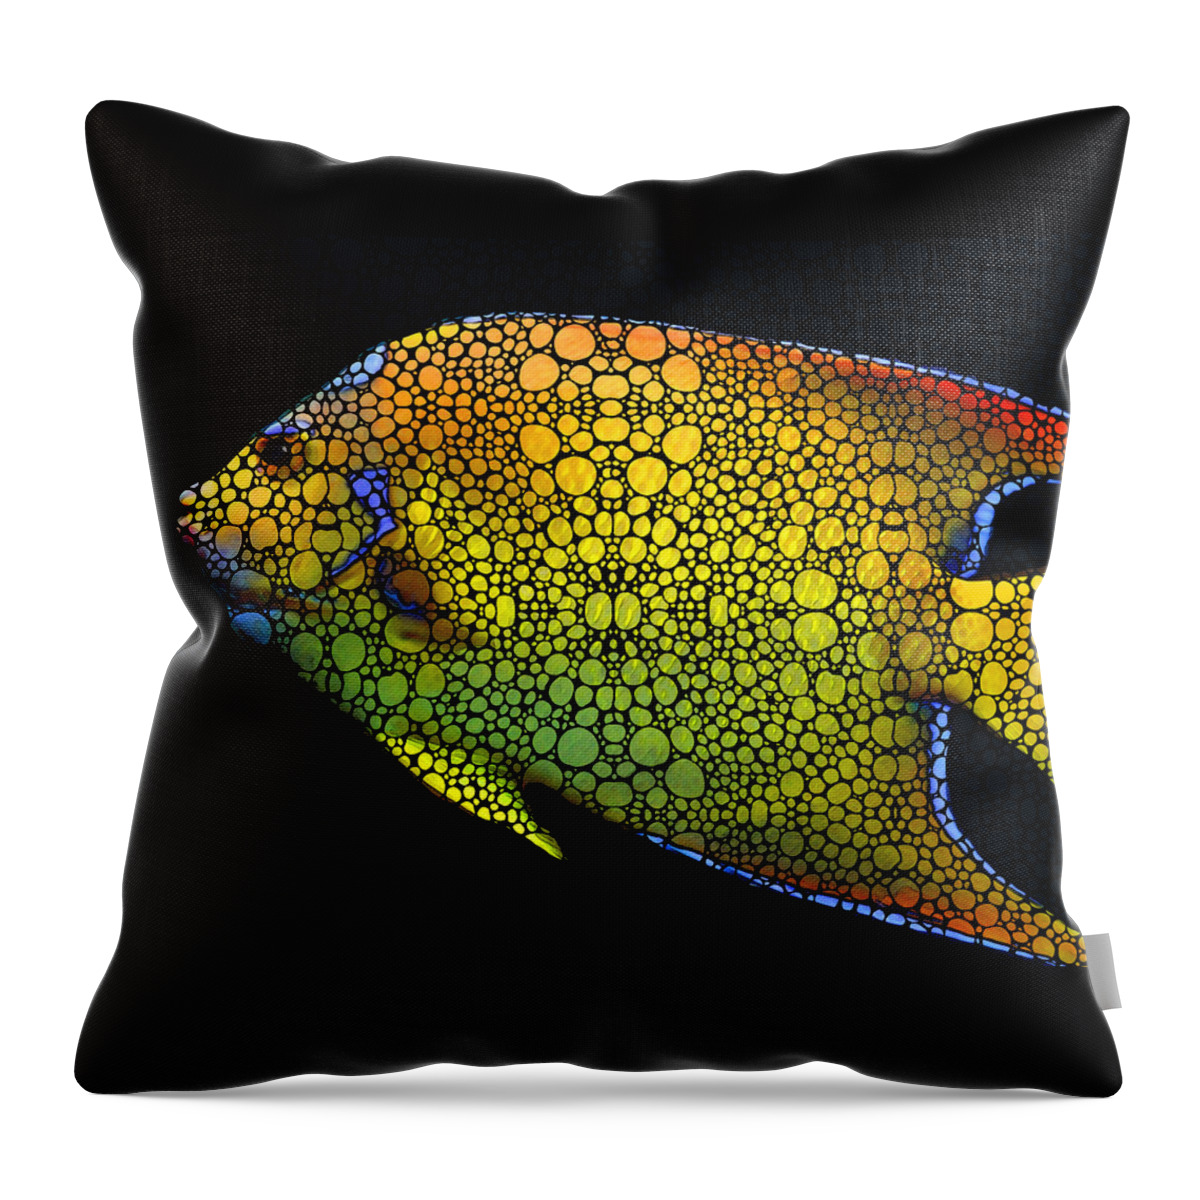 Fish Throw Pillow featuring the painting Tropical Fish 12 - Abstract Art By Sharon Cummings by Sharon Cummings